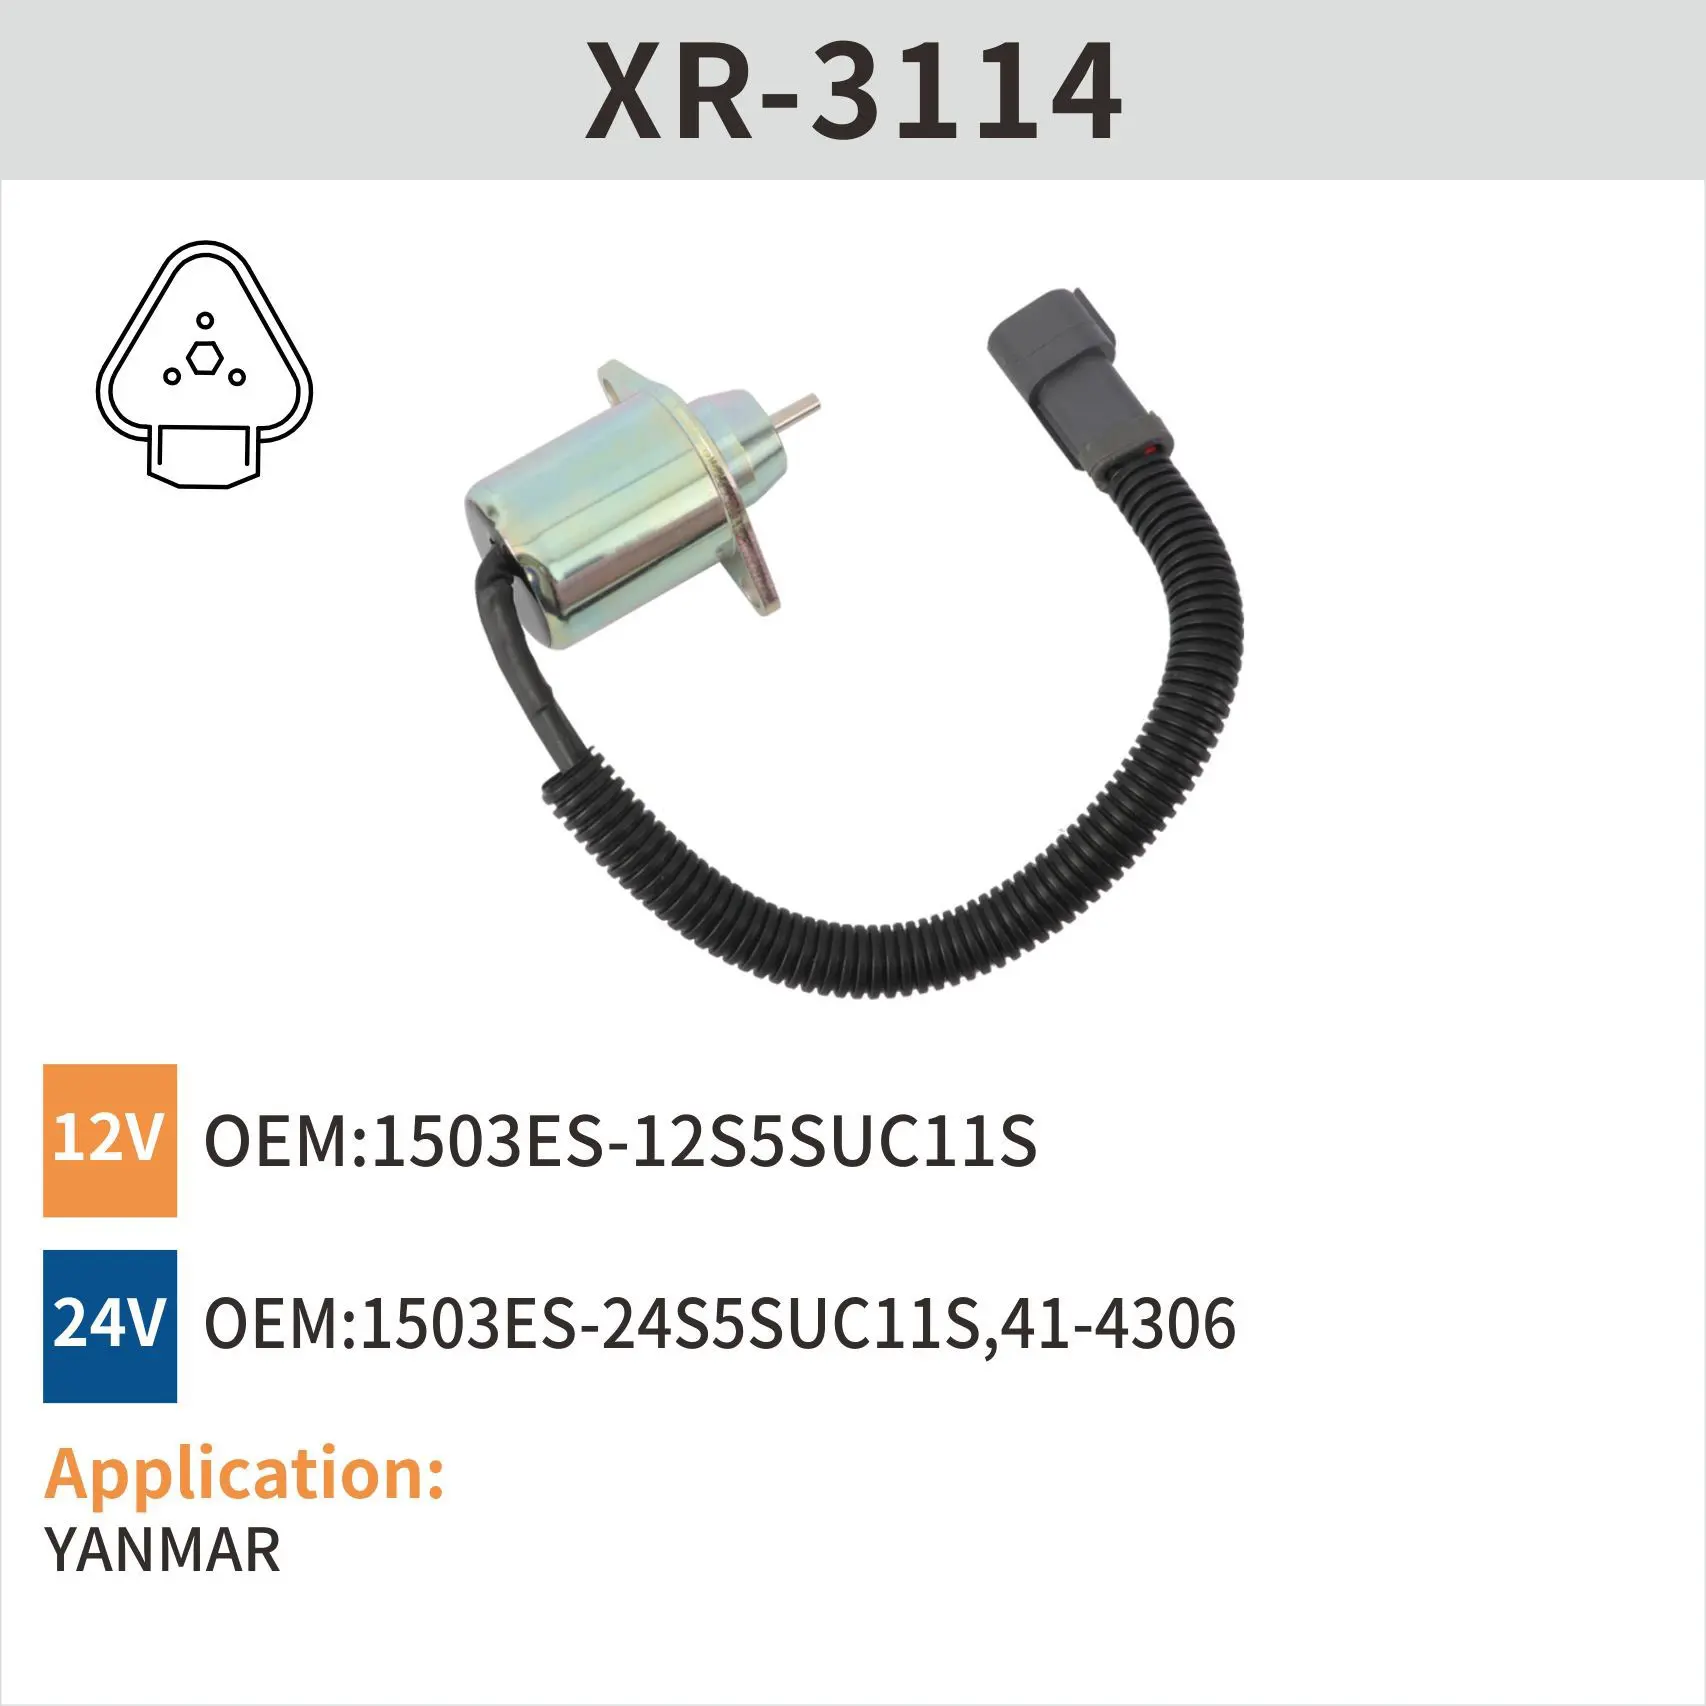 1503ES-12S5SUC11 Stop Solenoide for Yanmar Thermo King 12V